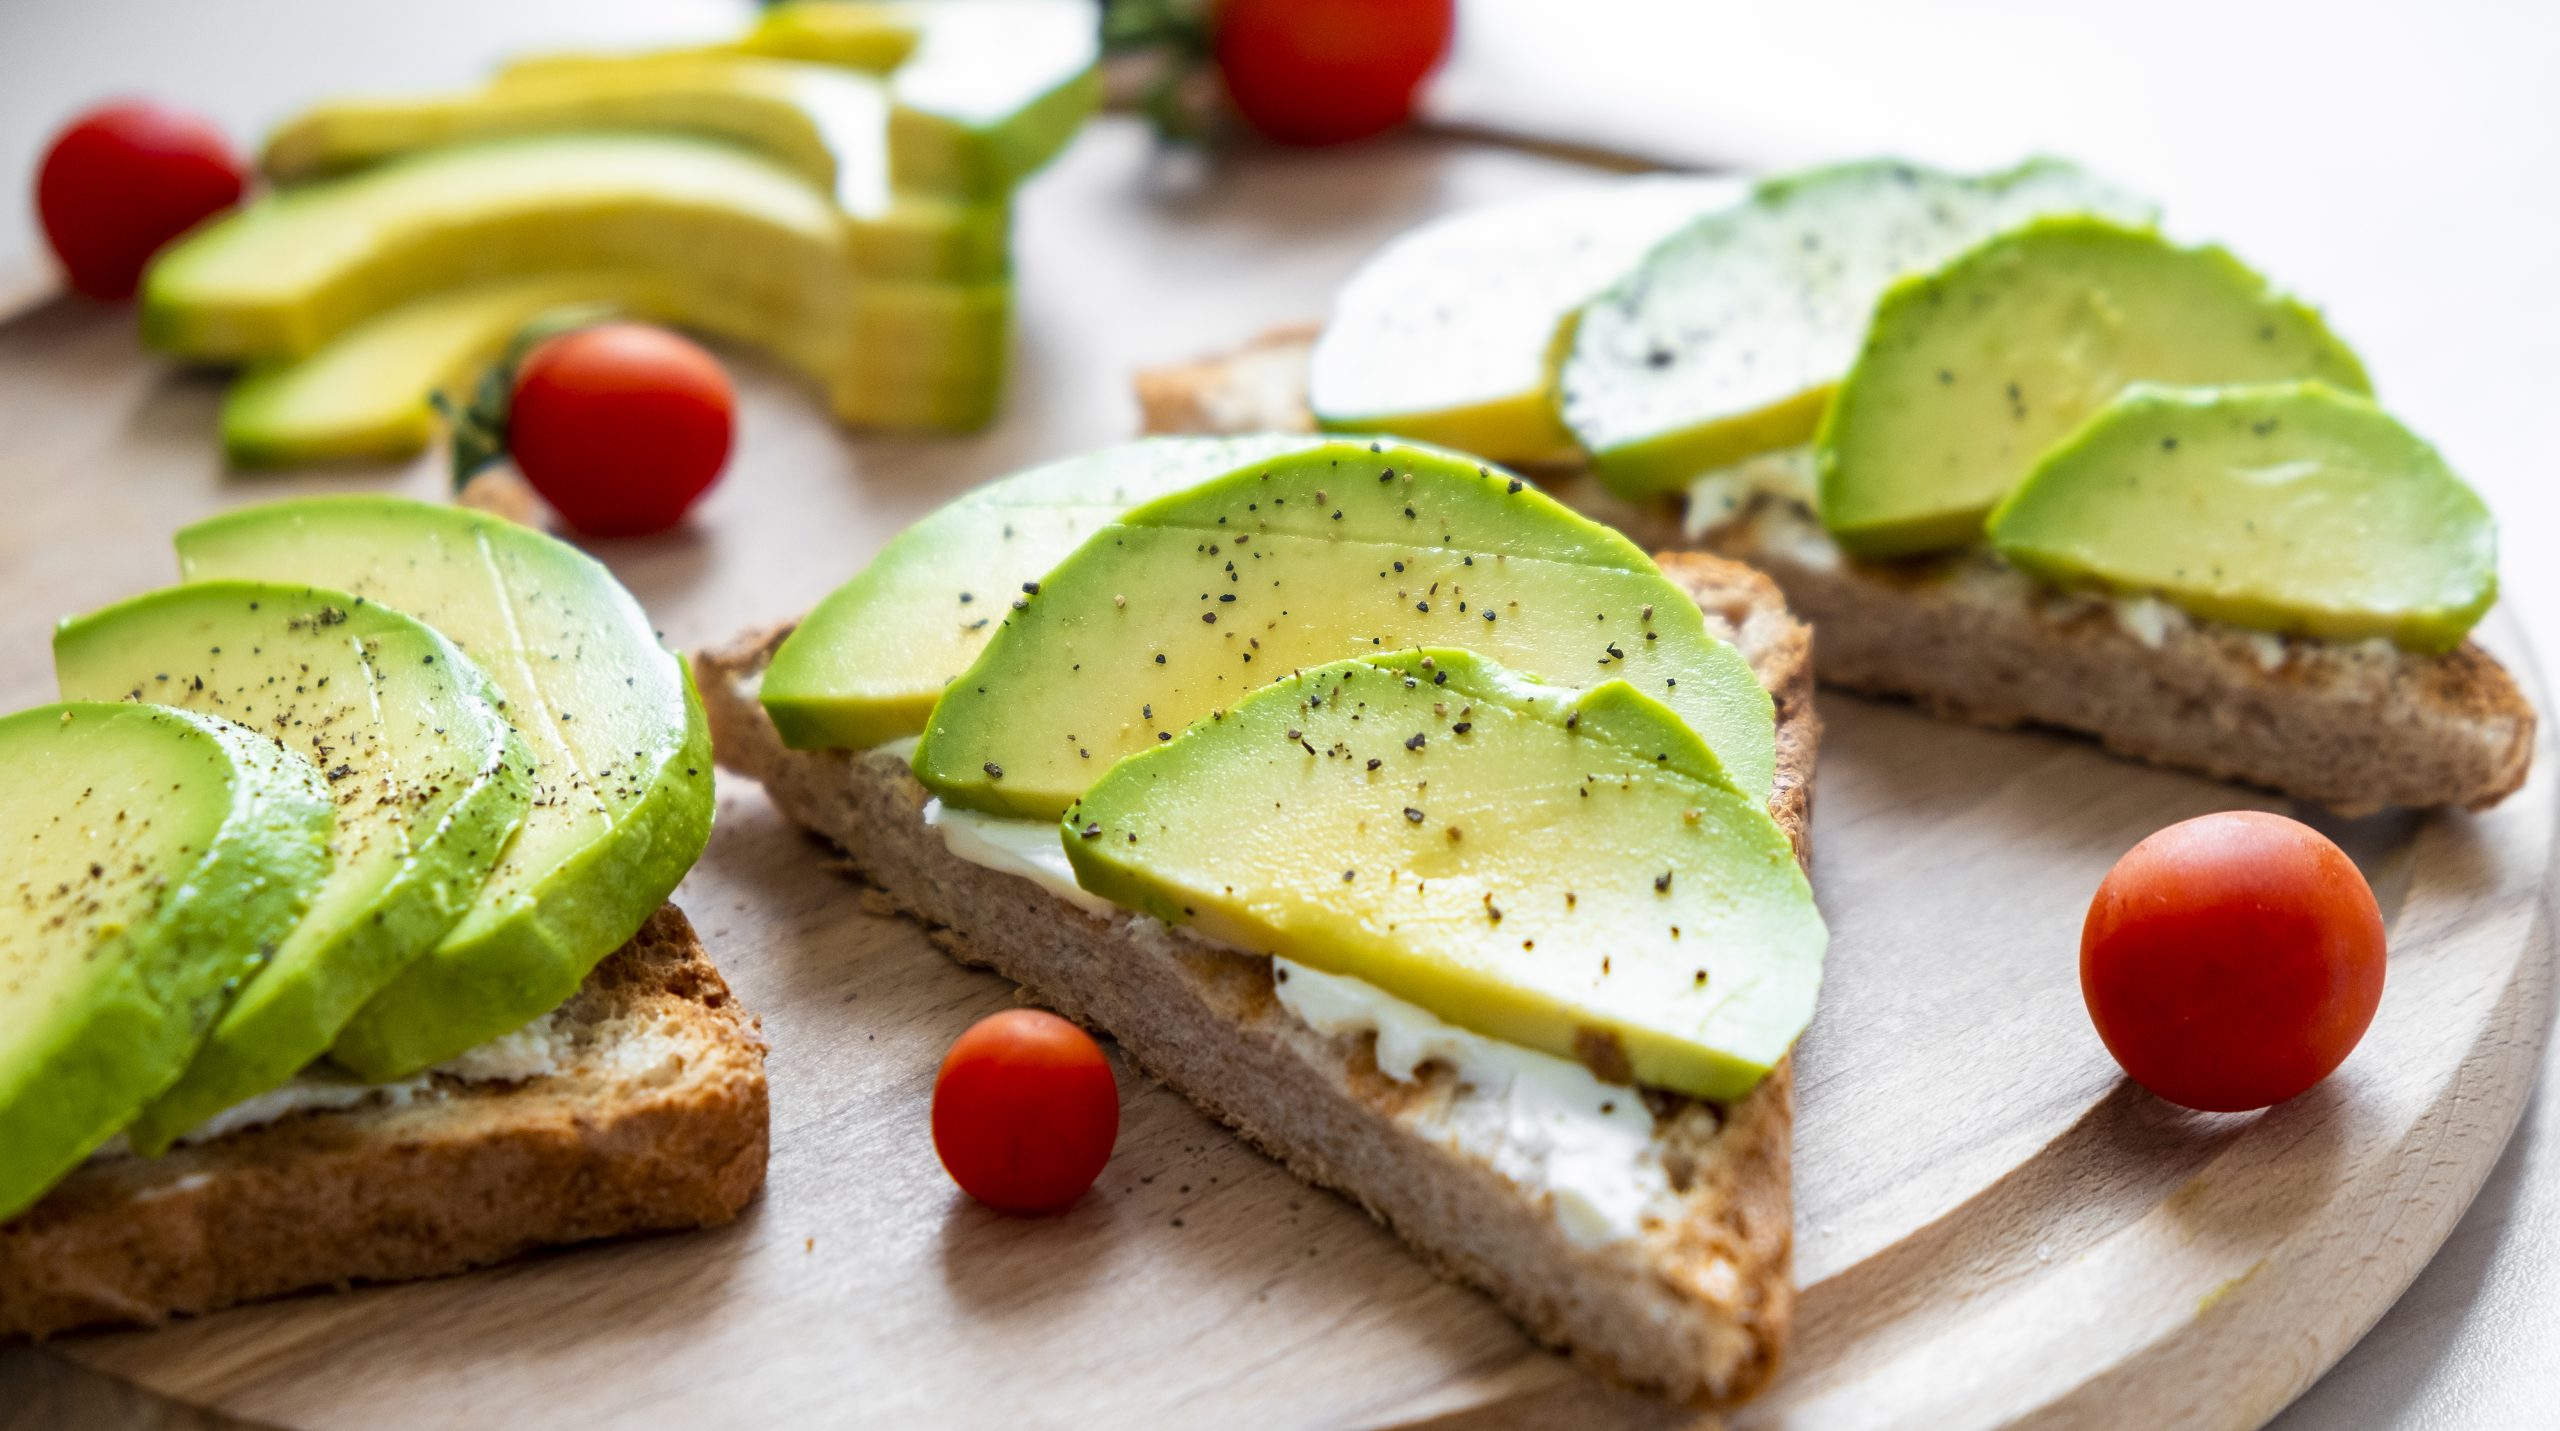 Healthy avocado toast with soft cheese, sliced avocado, cherry tomatoes and pepper on toasted bread for breakfast or lunch. Healthy snack, easy recipe of vegaterian bruschetta. Clean eating.